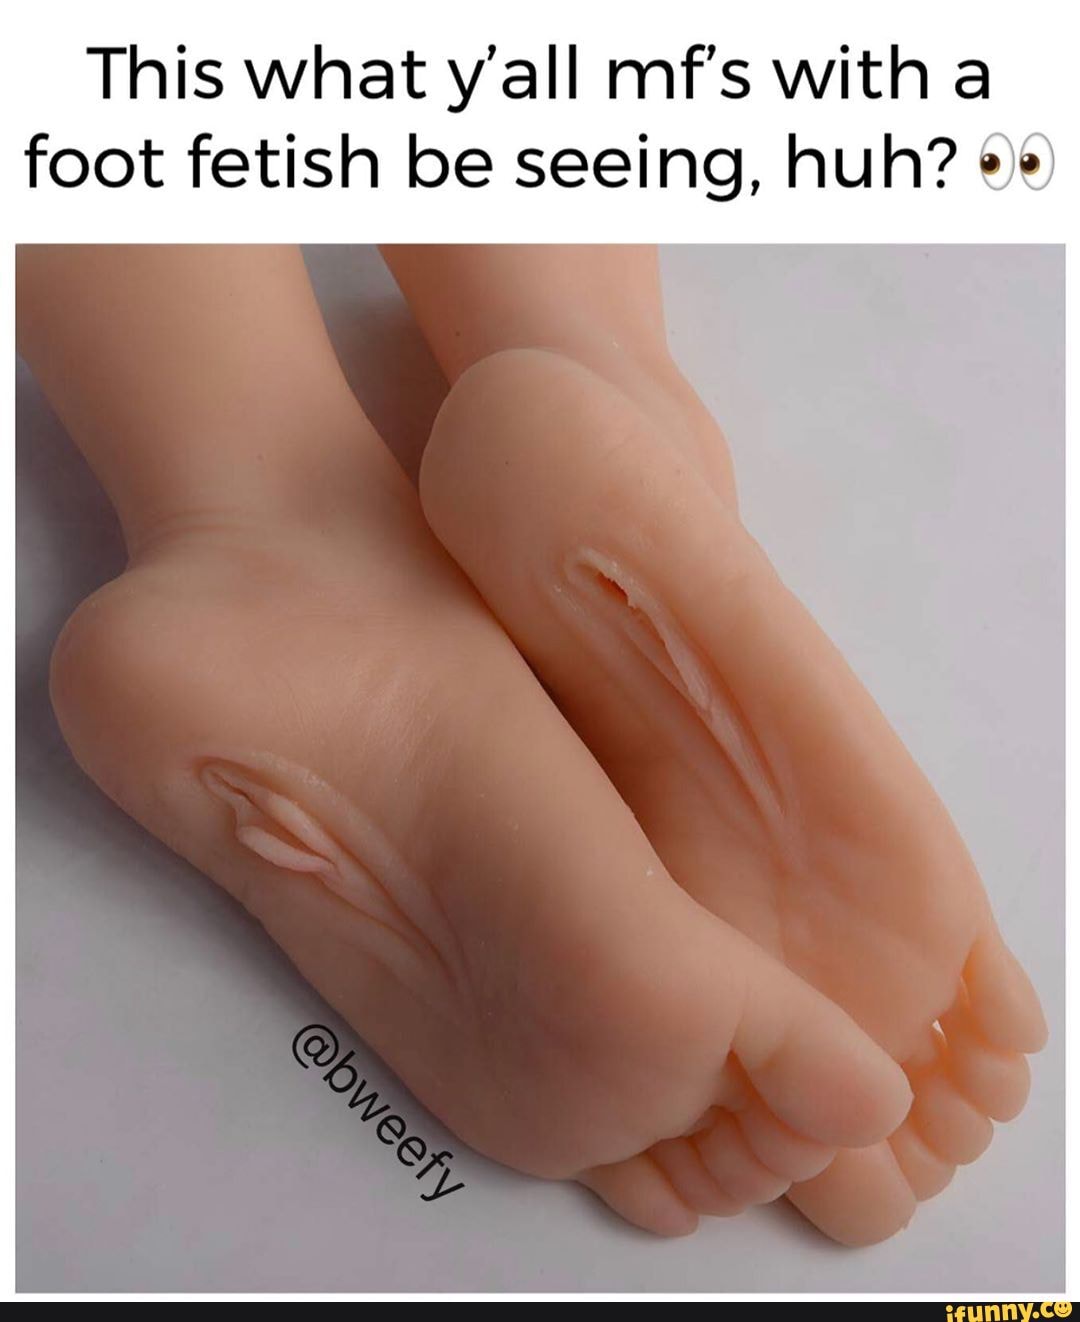 How Many People Have Foot Fetishes